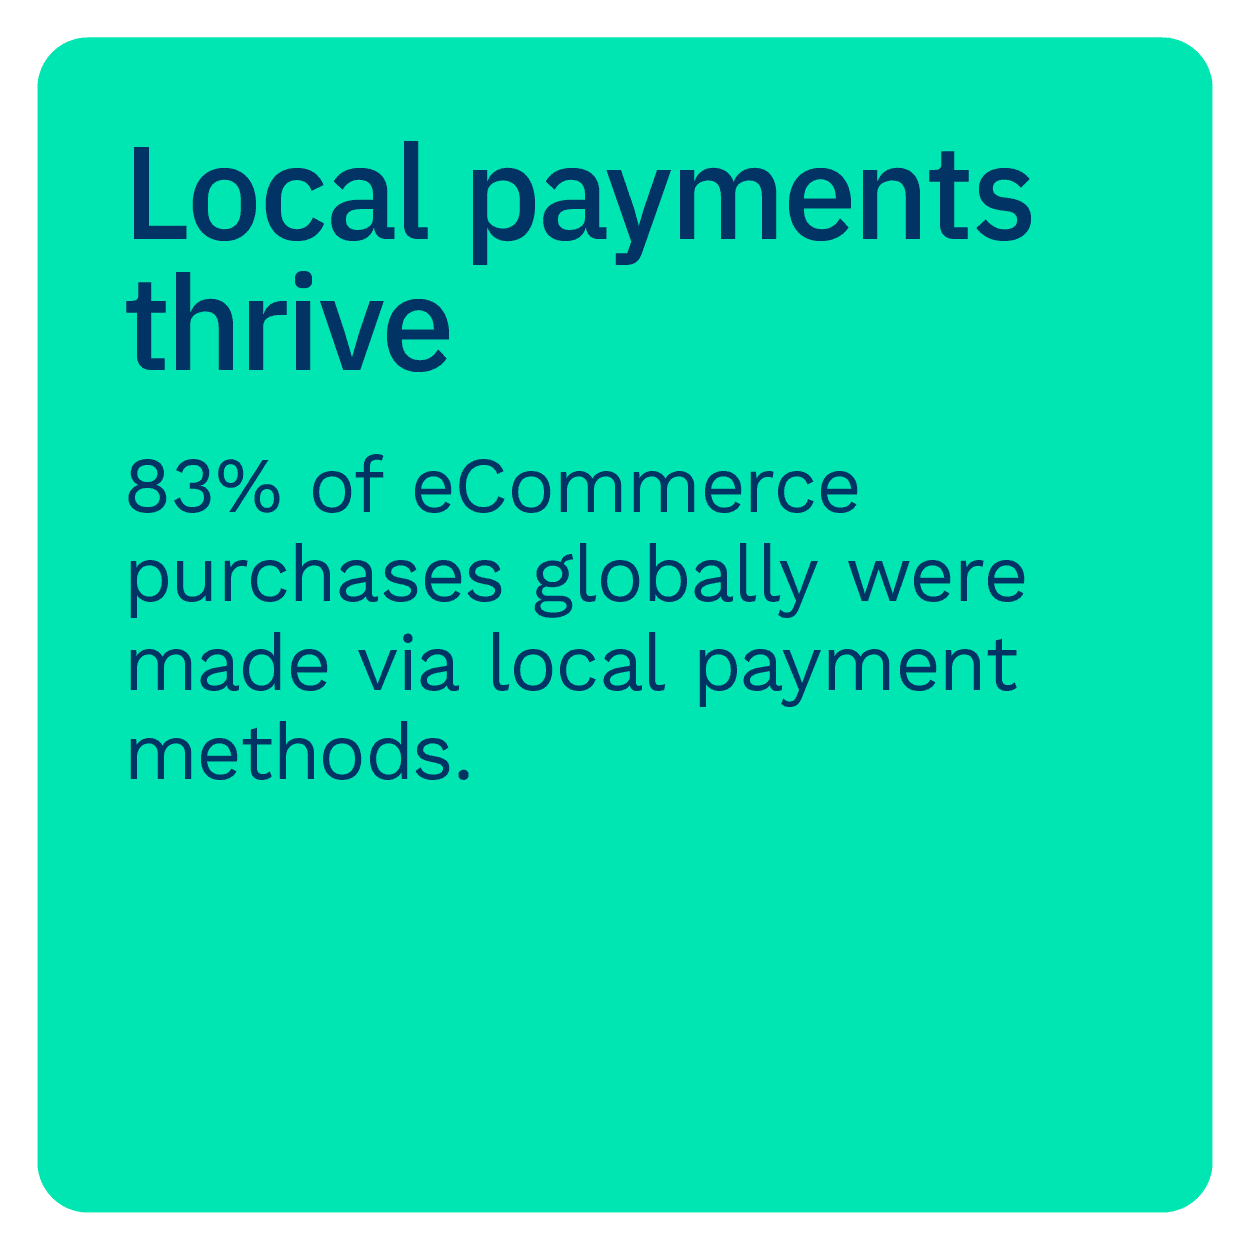 Local payments thrive: 83% of ecommerce purchases globally were made via local payment methods